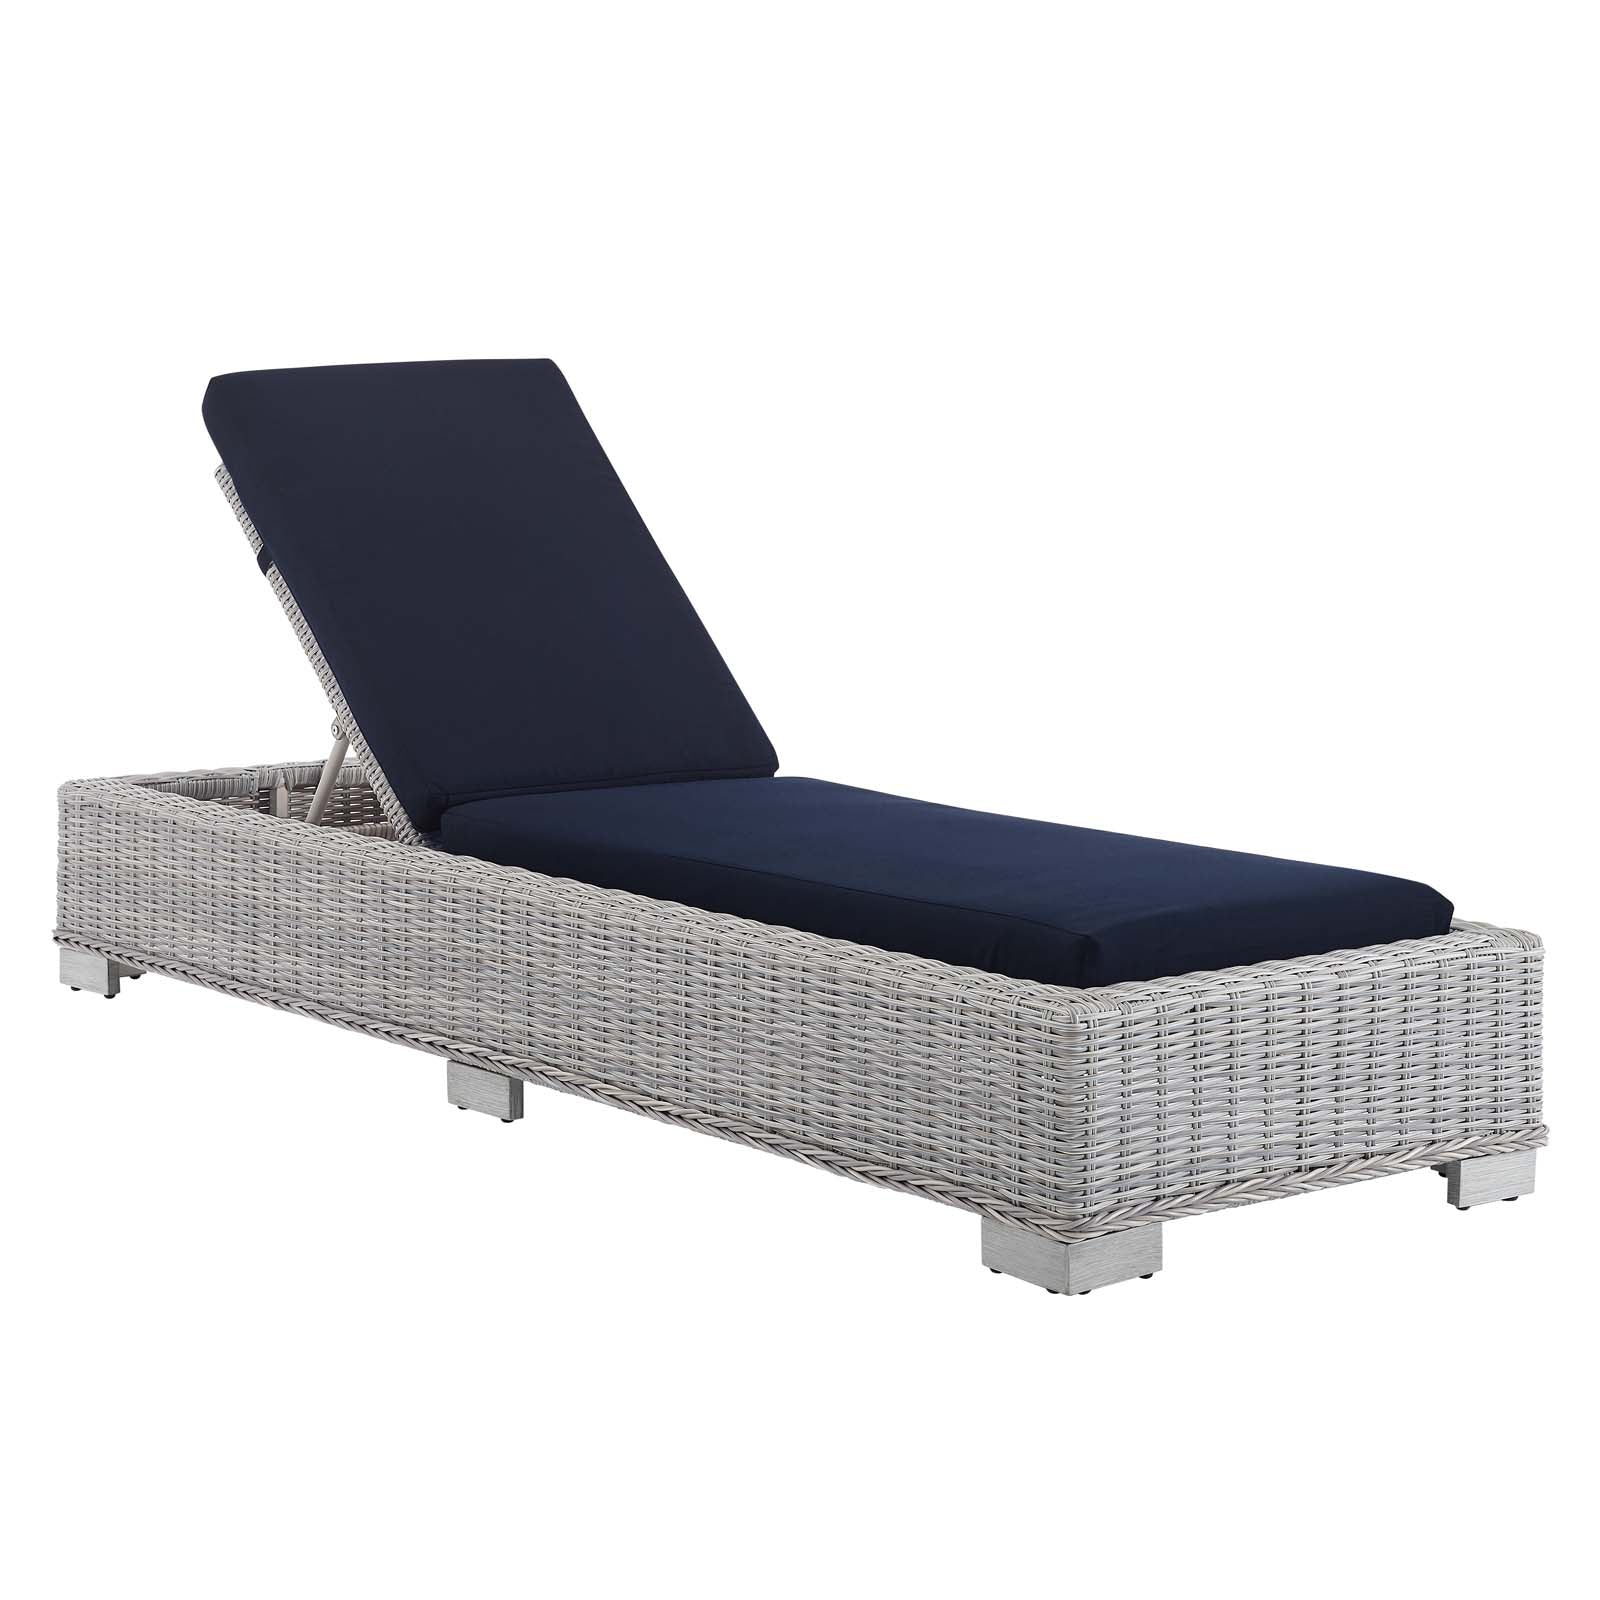 Modway Outdoor Loungers - Conway Sunbrella Outdoor Patio Wicker Rattan Chaise Lounge Light Gray Navy